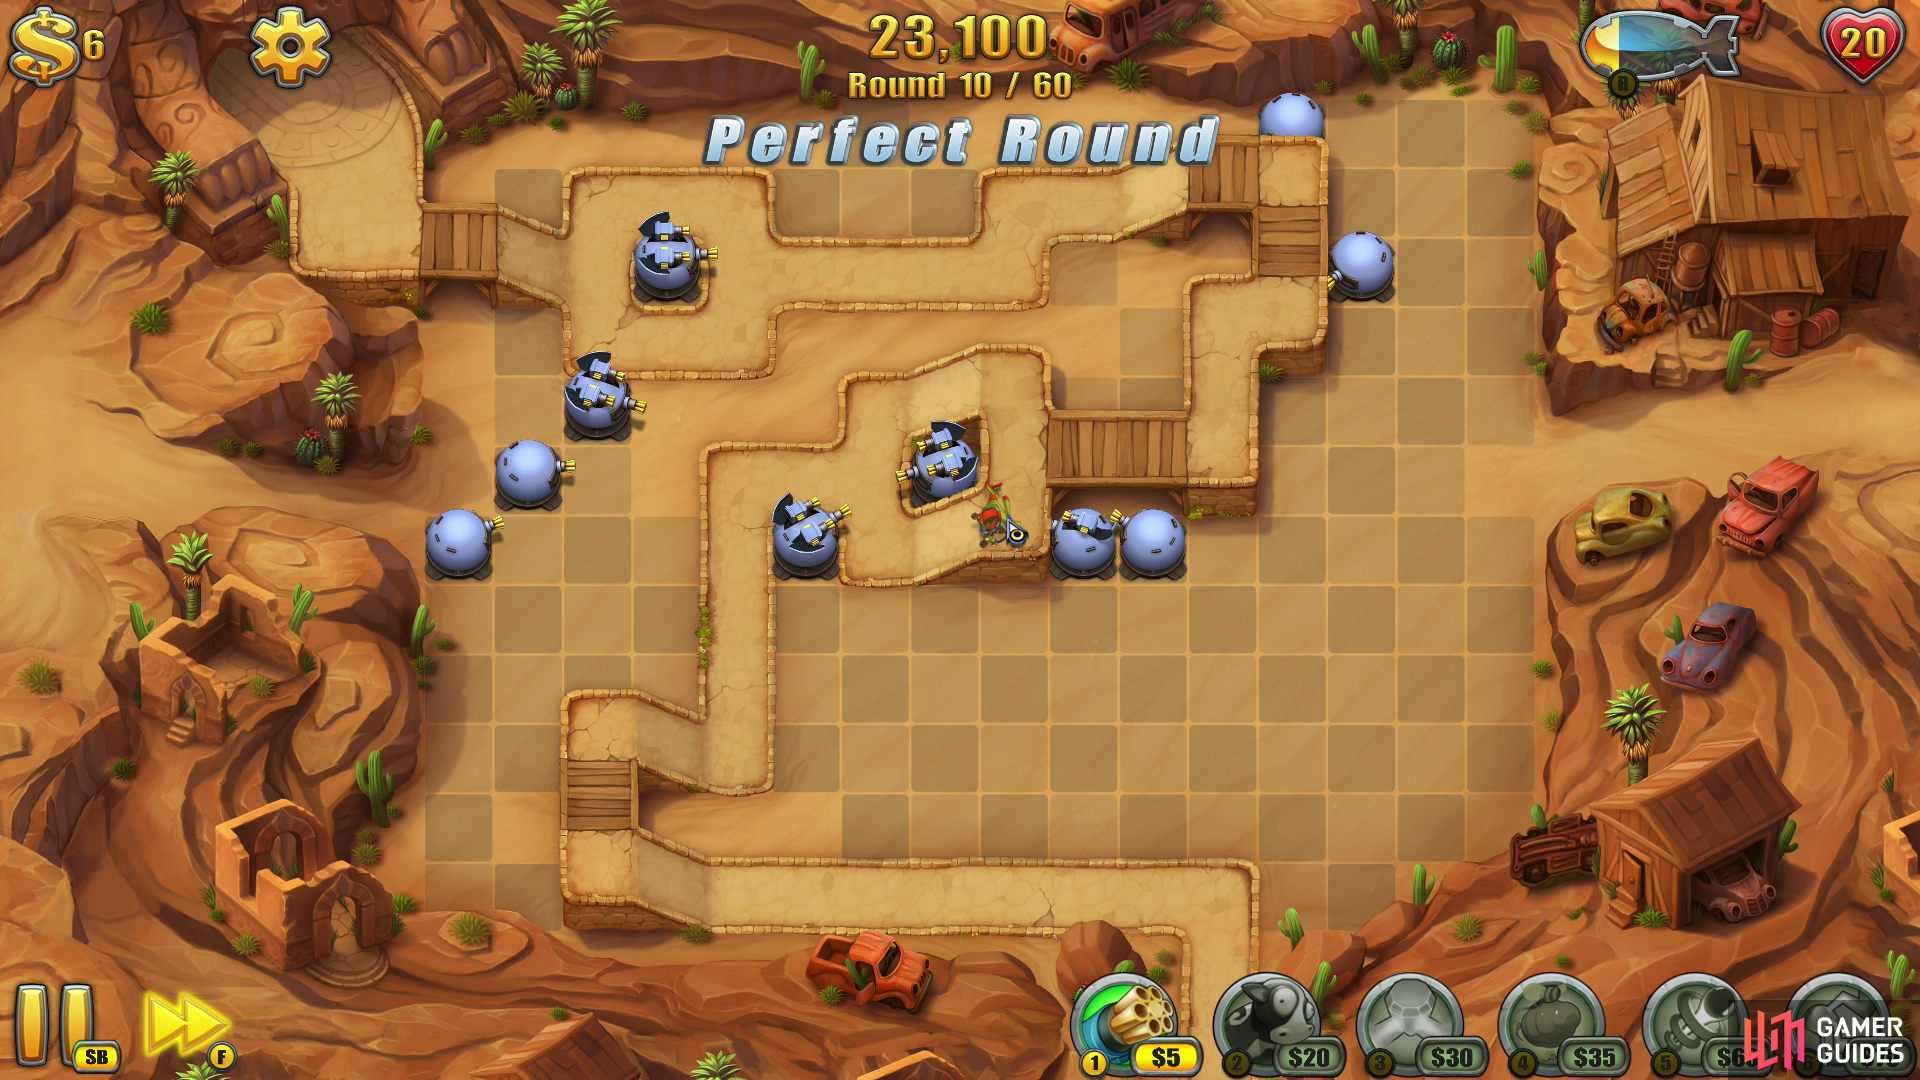 This map isn’t too difficult to do without any items, buy your towers will need to be placed properly and upgraded appropriately, otherwise enemies will slip through the cracks (and here at GamerGuides.com, we don’t tolerate Fieldrunners making it to the exit).